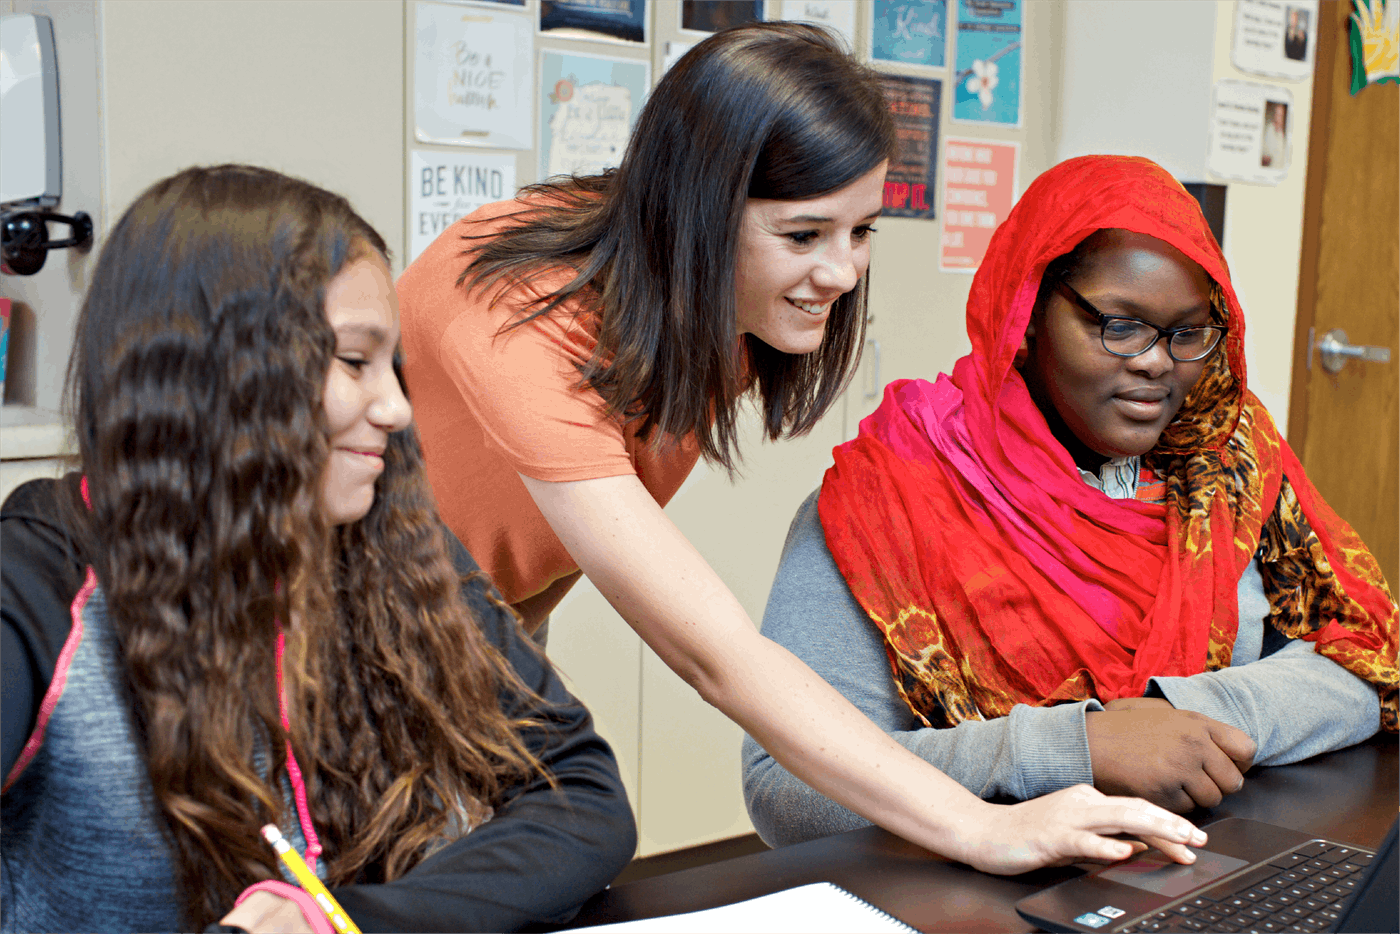 Teacher assisting two students, one wearing a hijab, with a laptop in a colorful classroom setting.